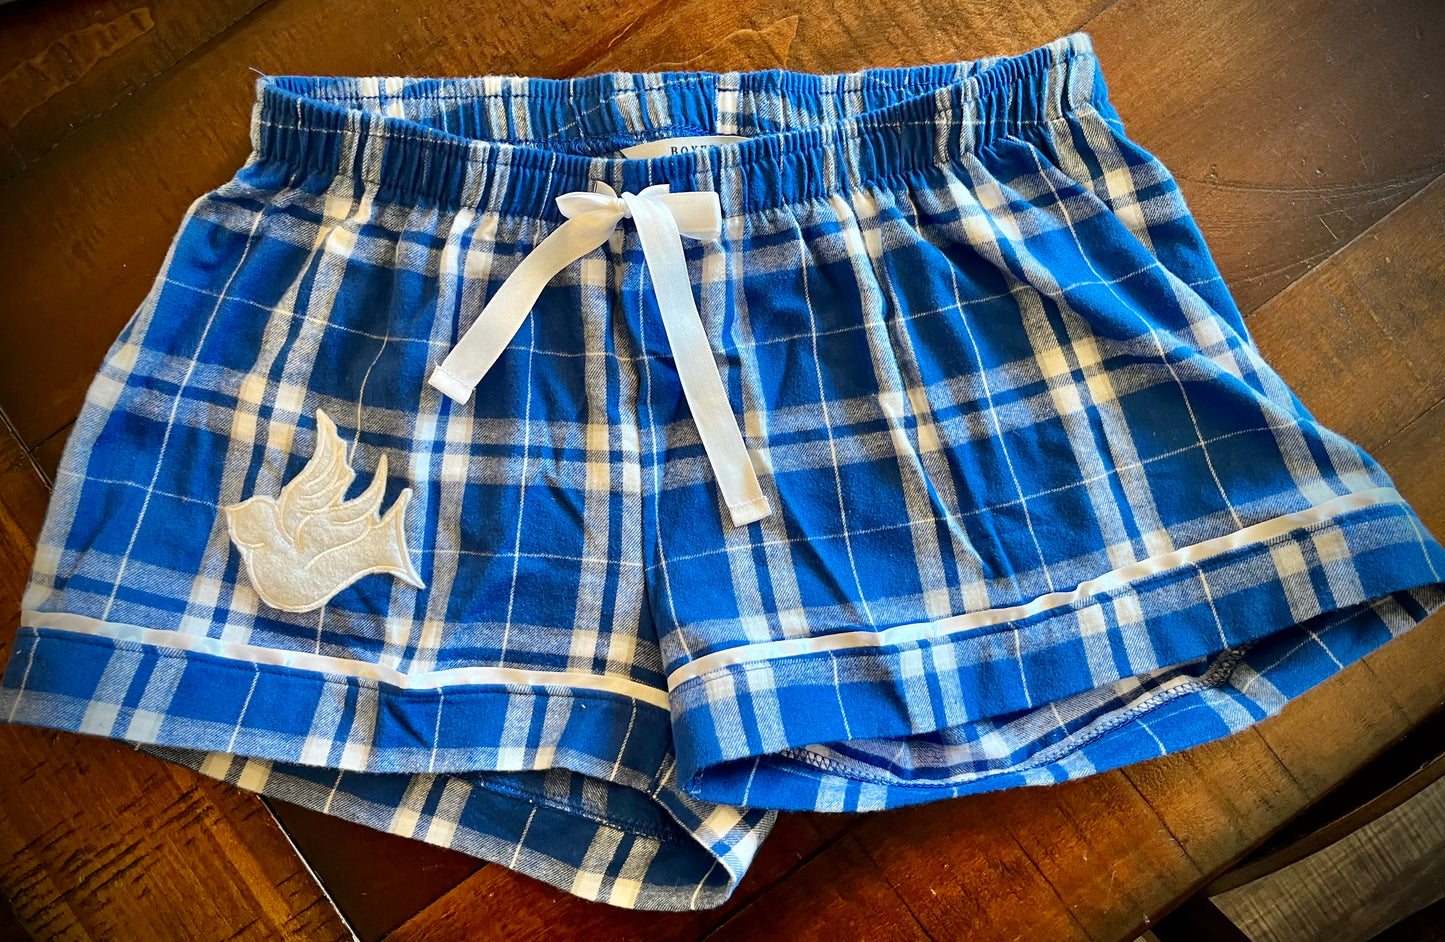 SSA Doves Flannel Sleep Shorts with Dove Appliqué